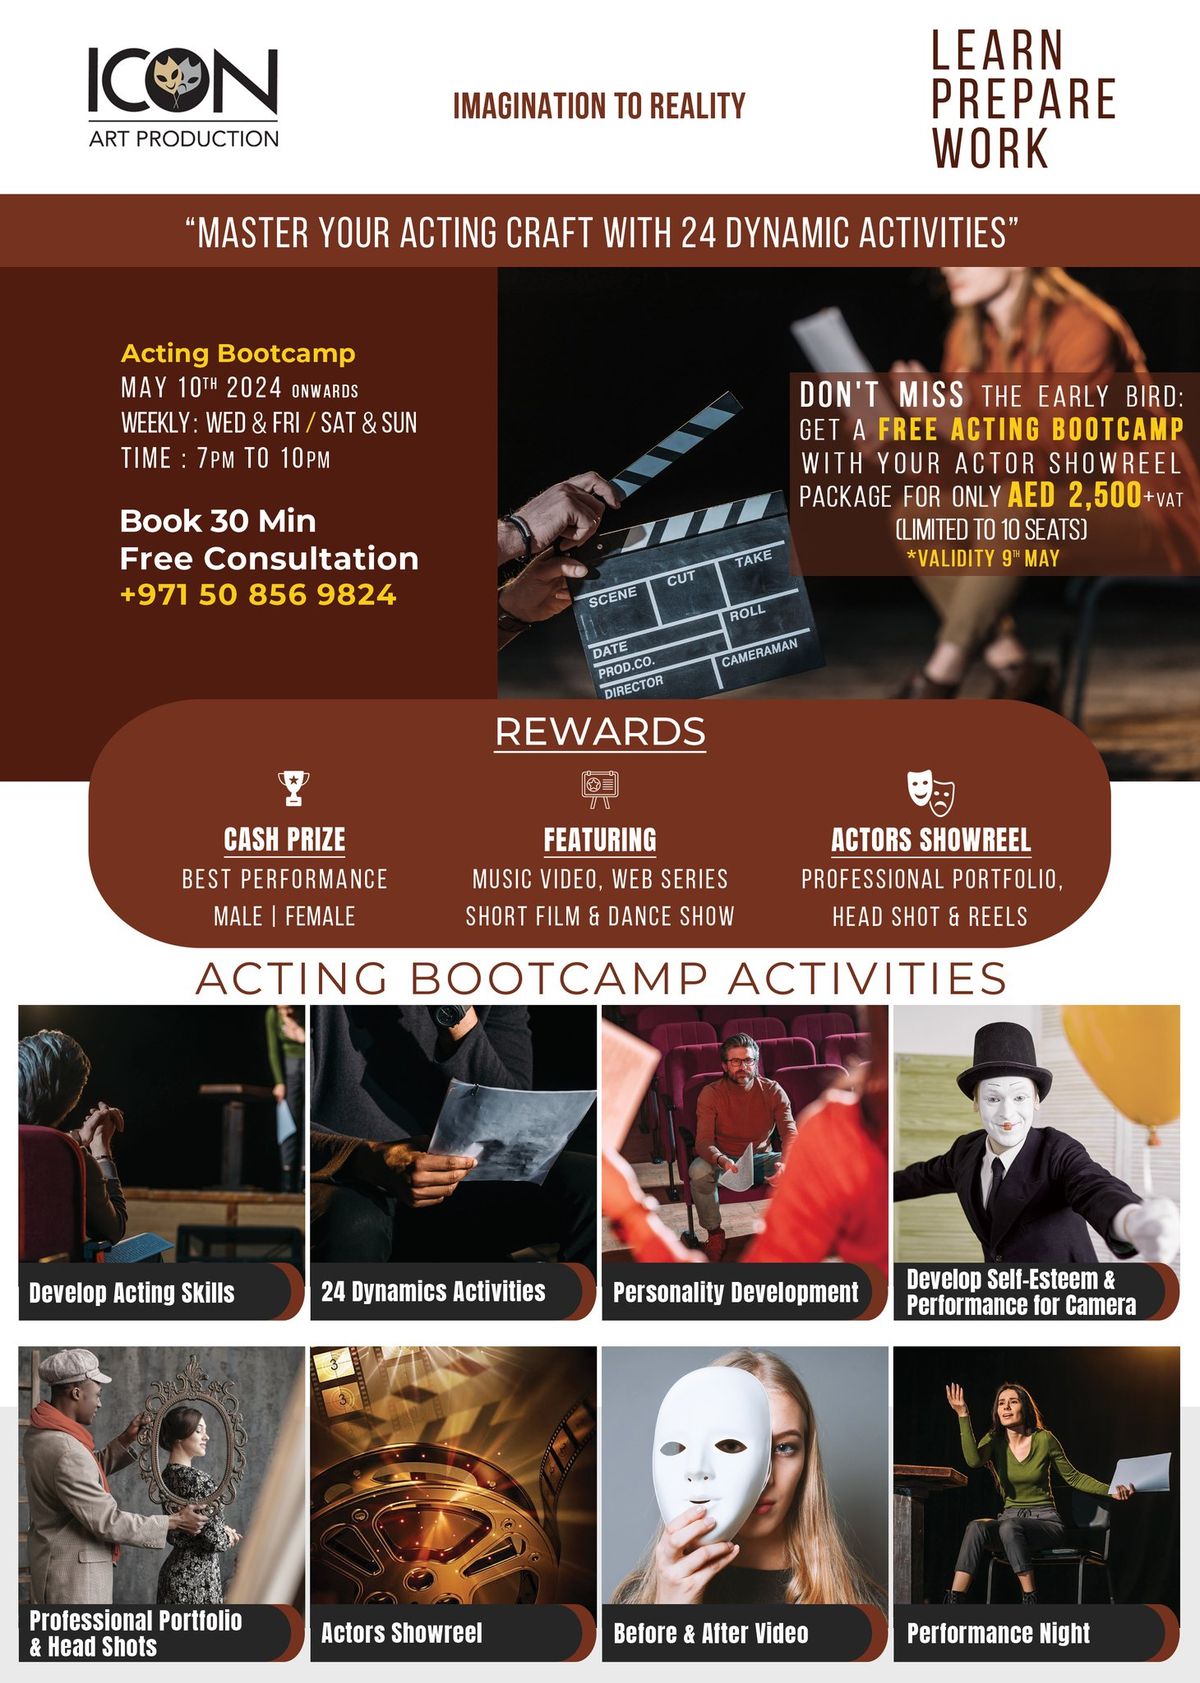 Acting Bootcamp-Master your acting craft with 24 Dynamic Activities with Actor Showreel & Portfolio